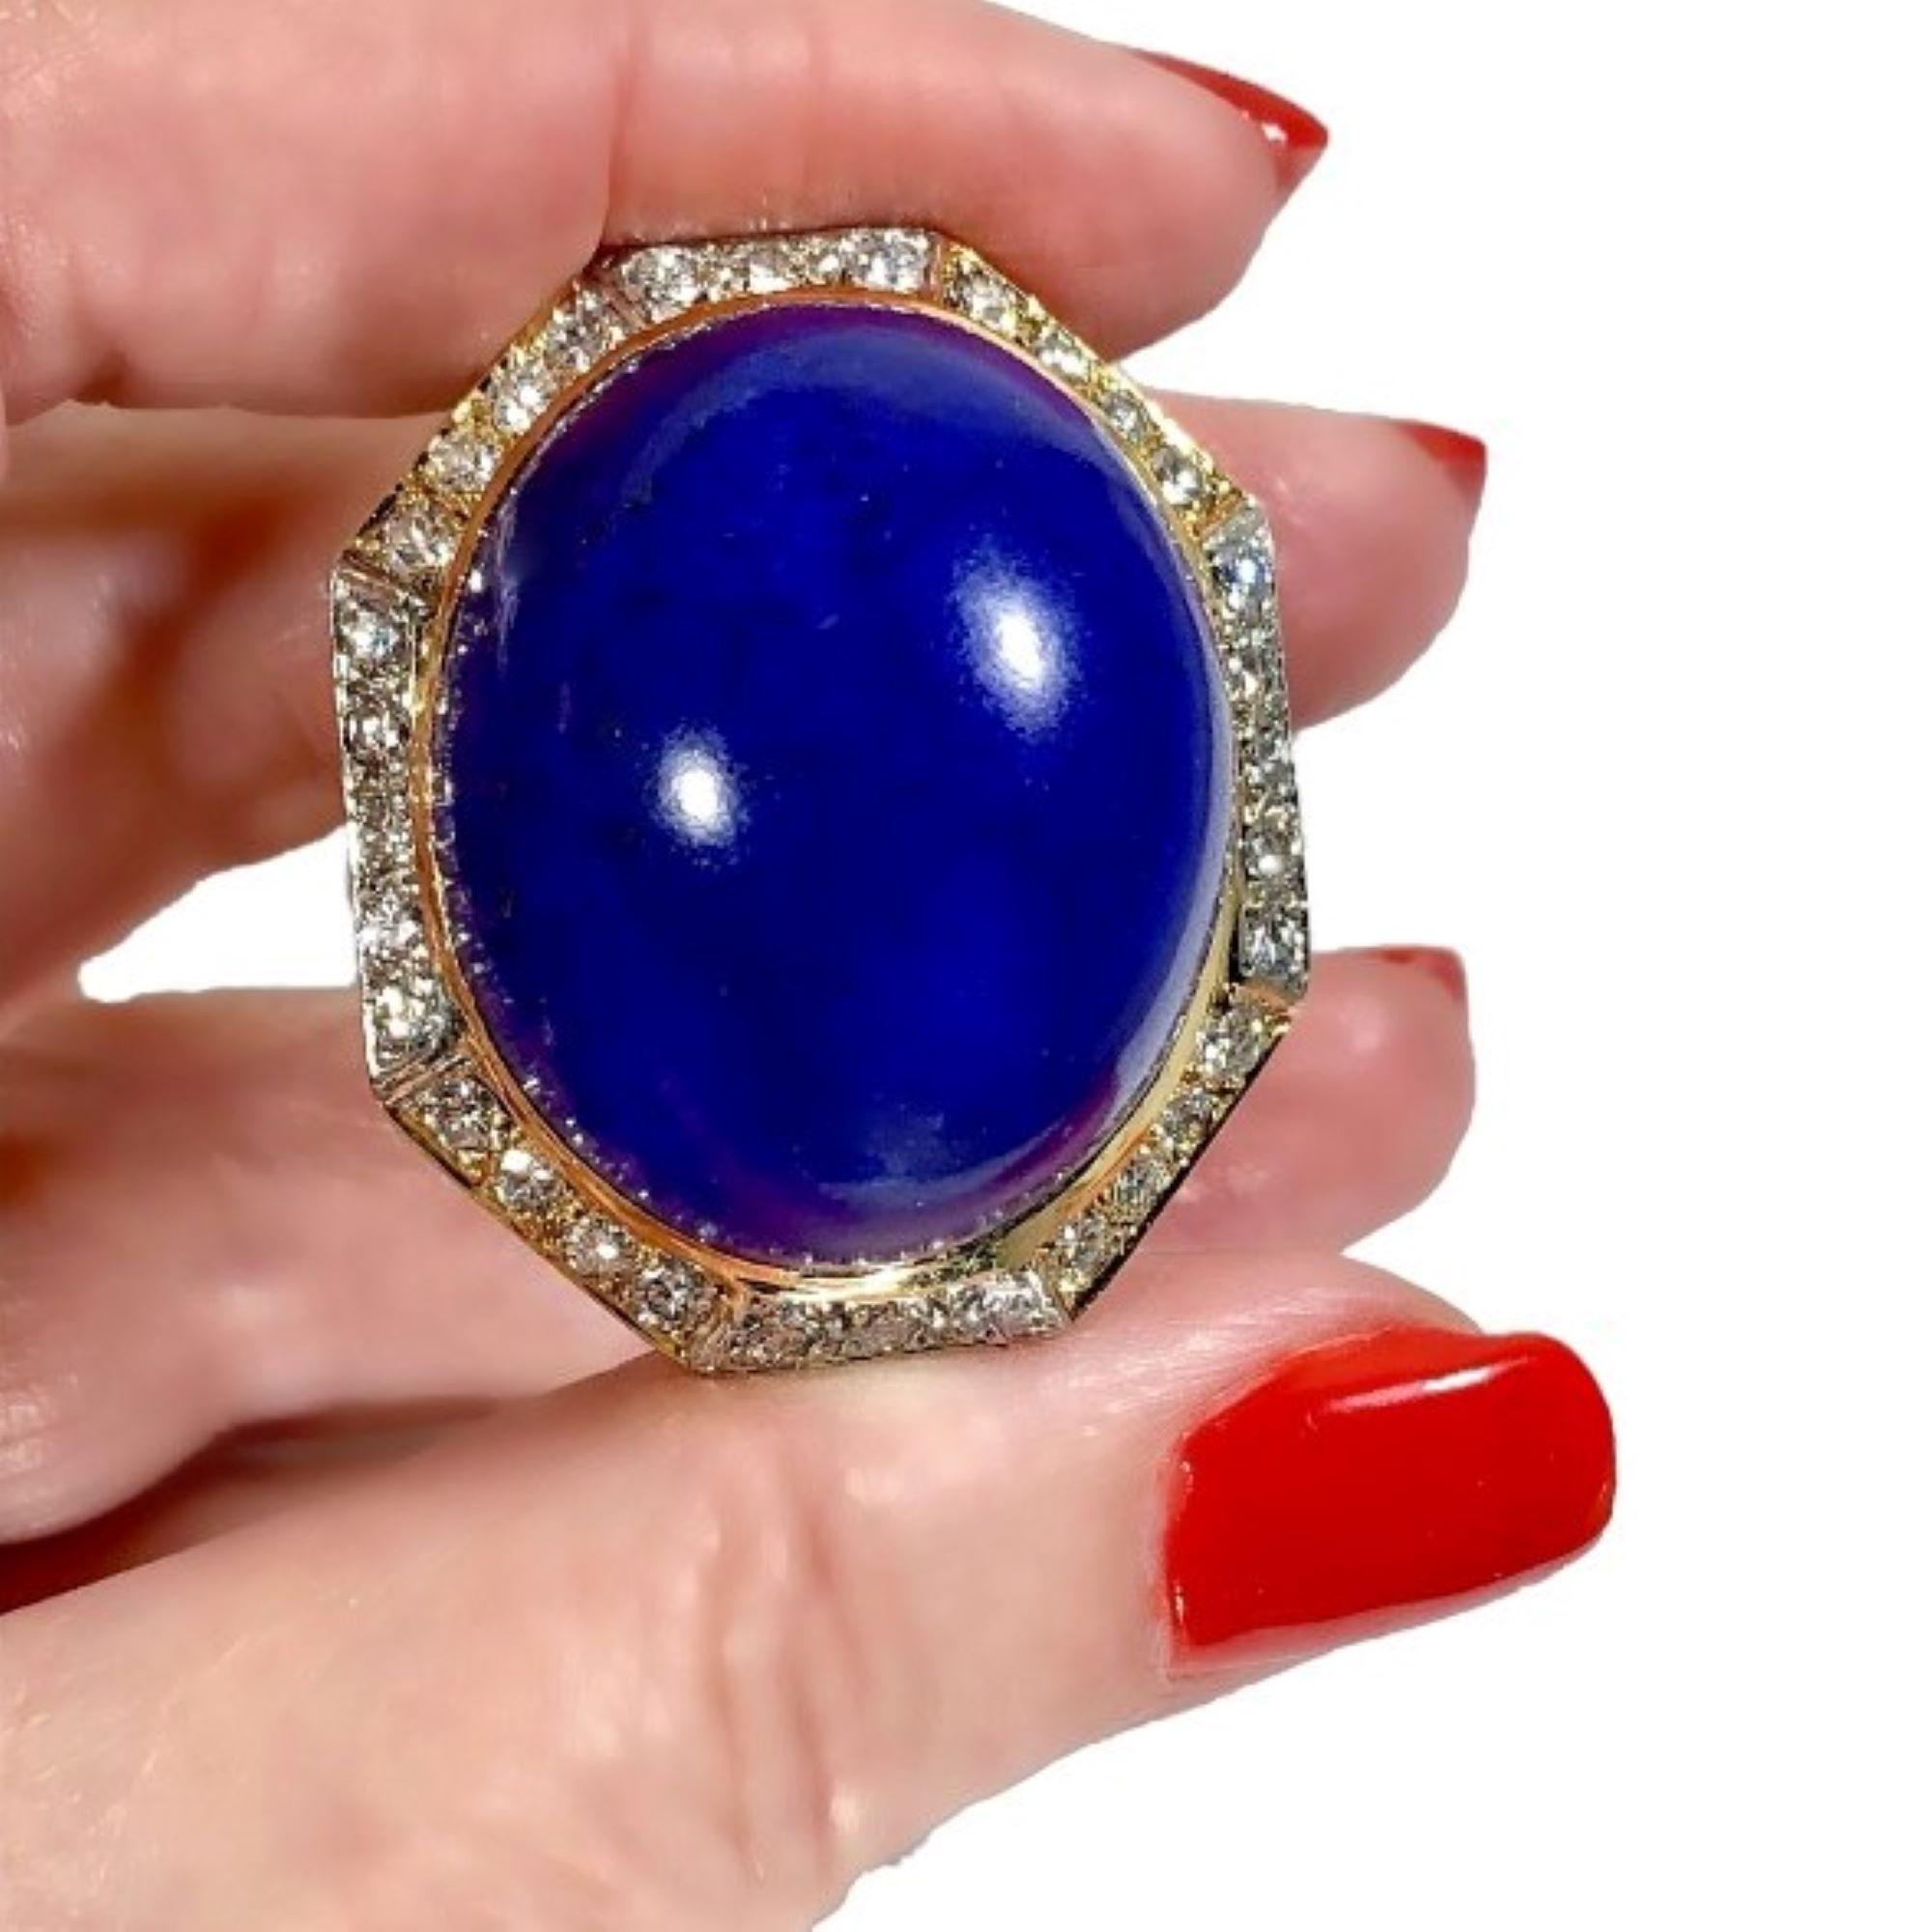 Massive Gold Cocktail Ring with 86 Carat Lapis-Lazuli Cabochon and Diamonds 4